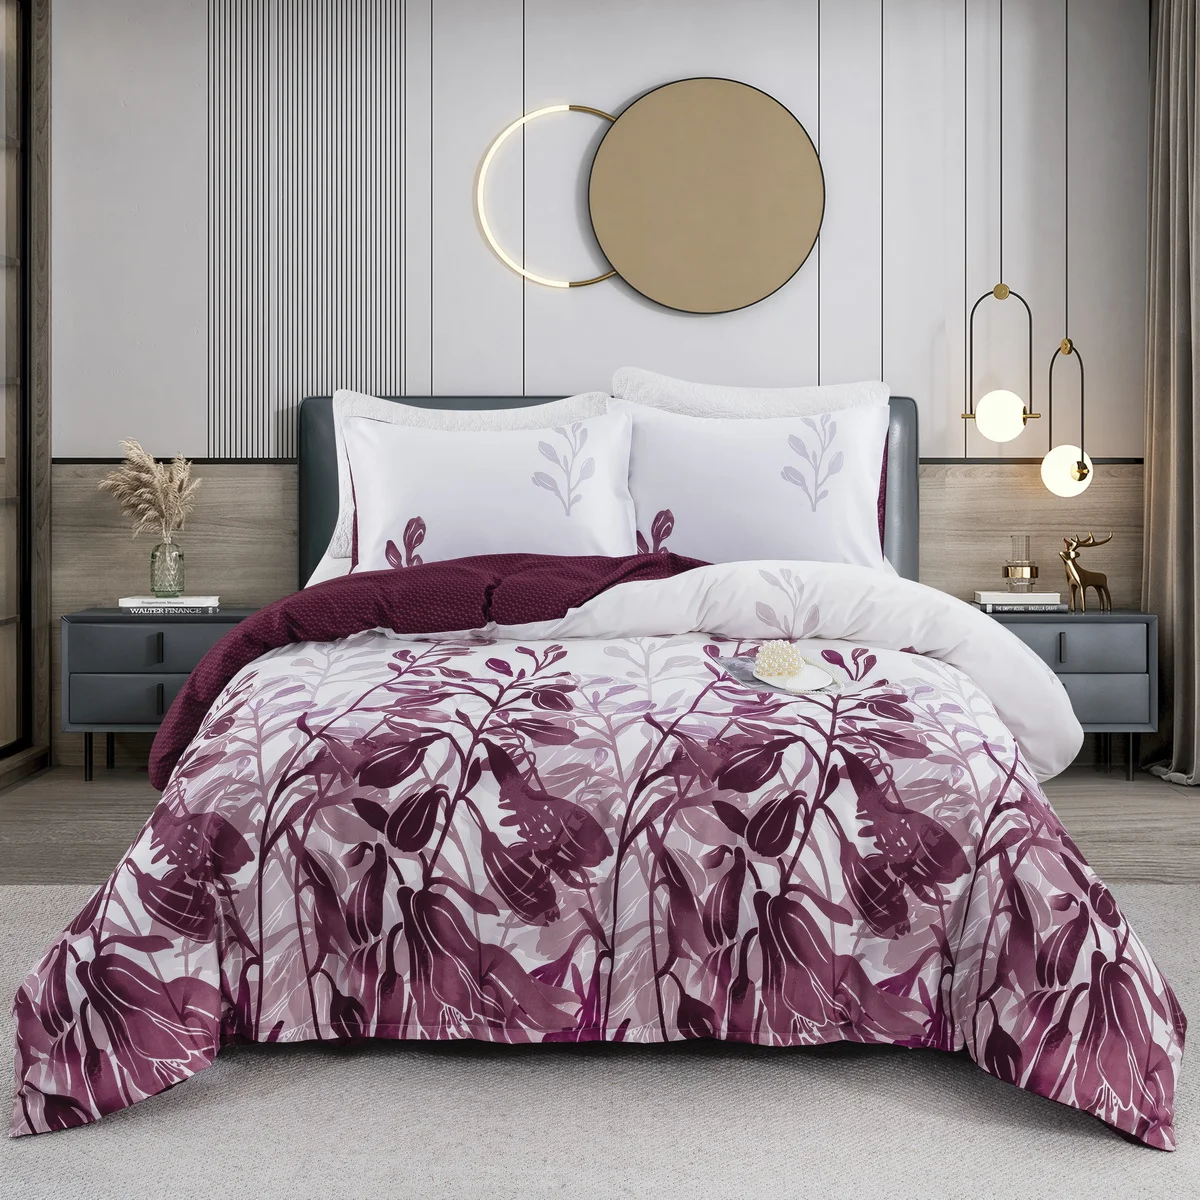 

Maroon Floral Duvet Cover Set King Queen Double Single Full Twin Size, 3 Piece Soft Printed Microfiber Duvet Comforter Covers